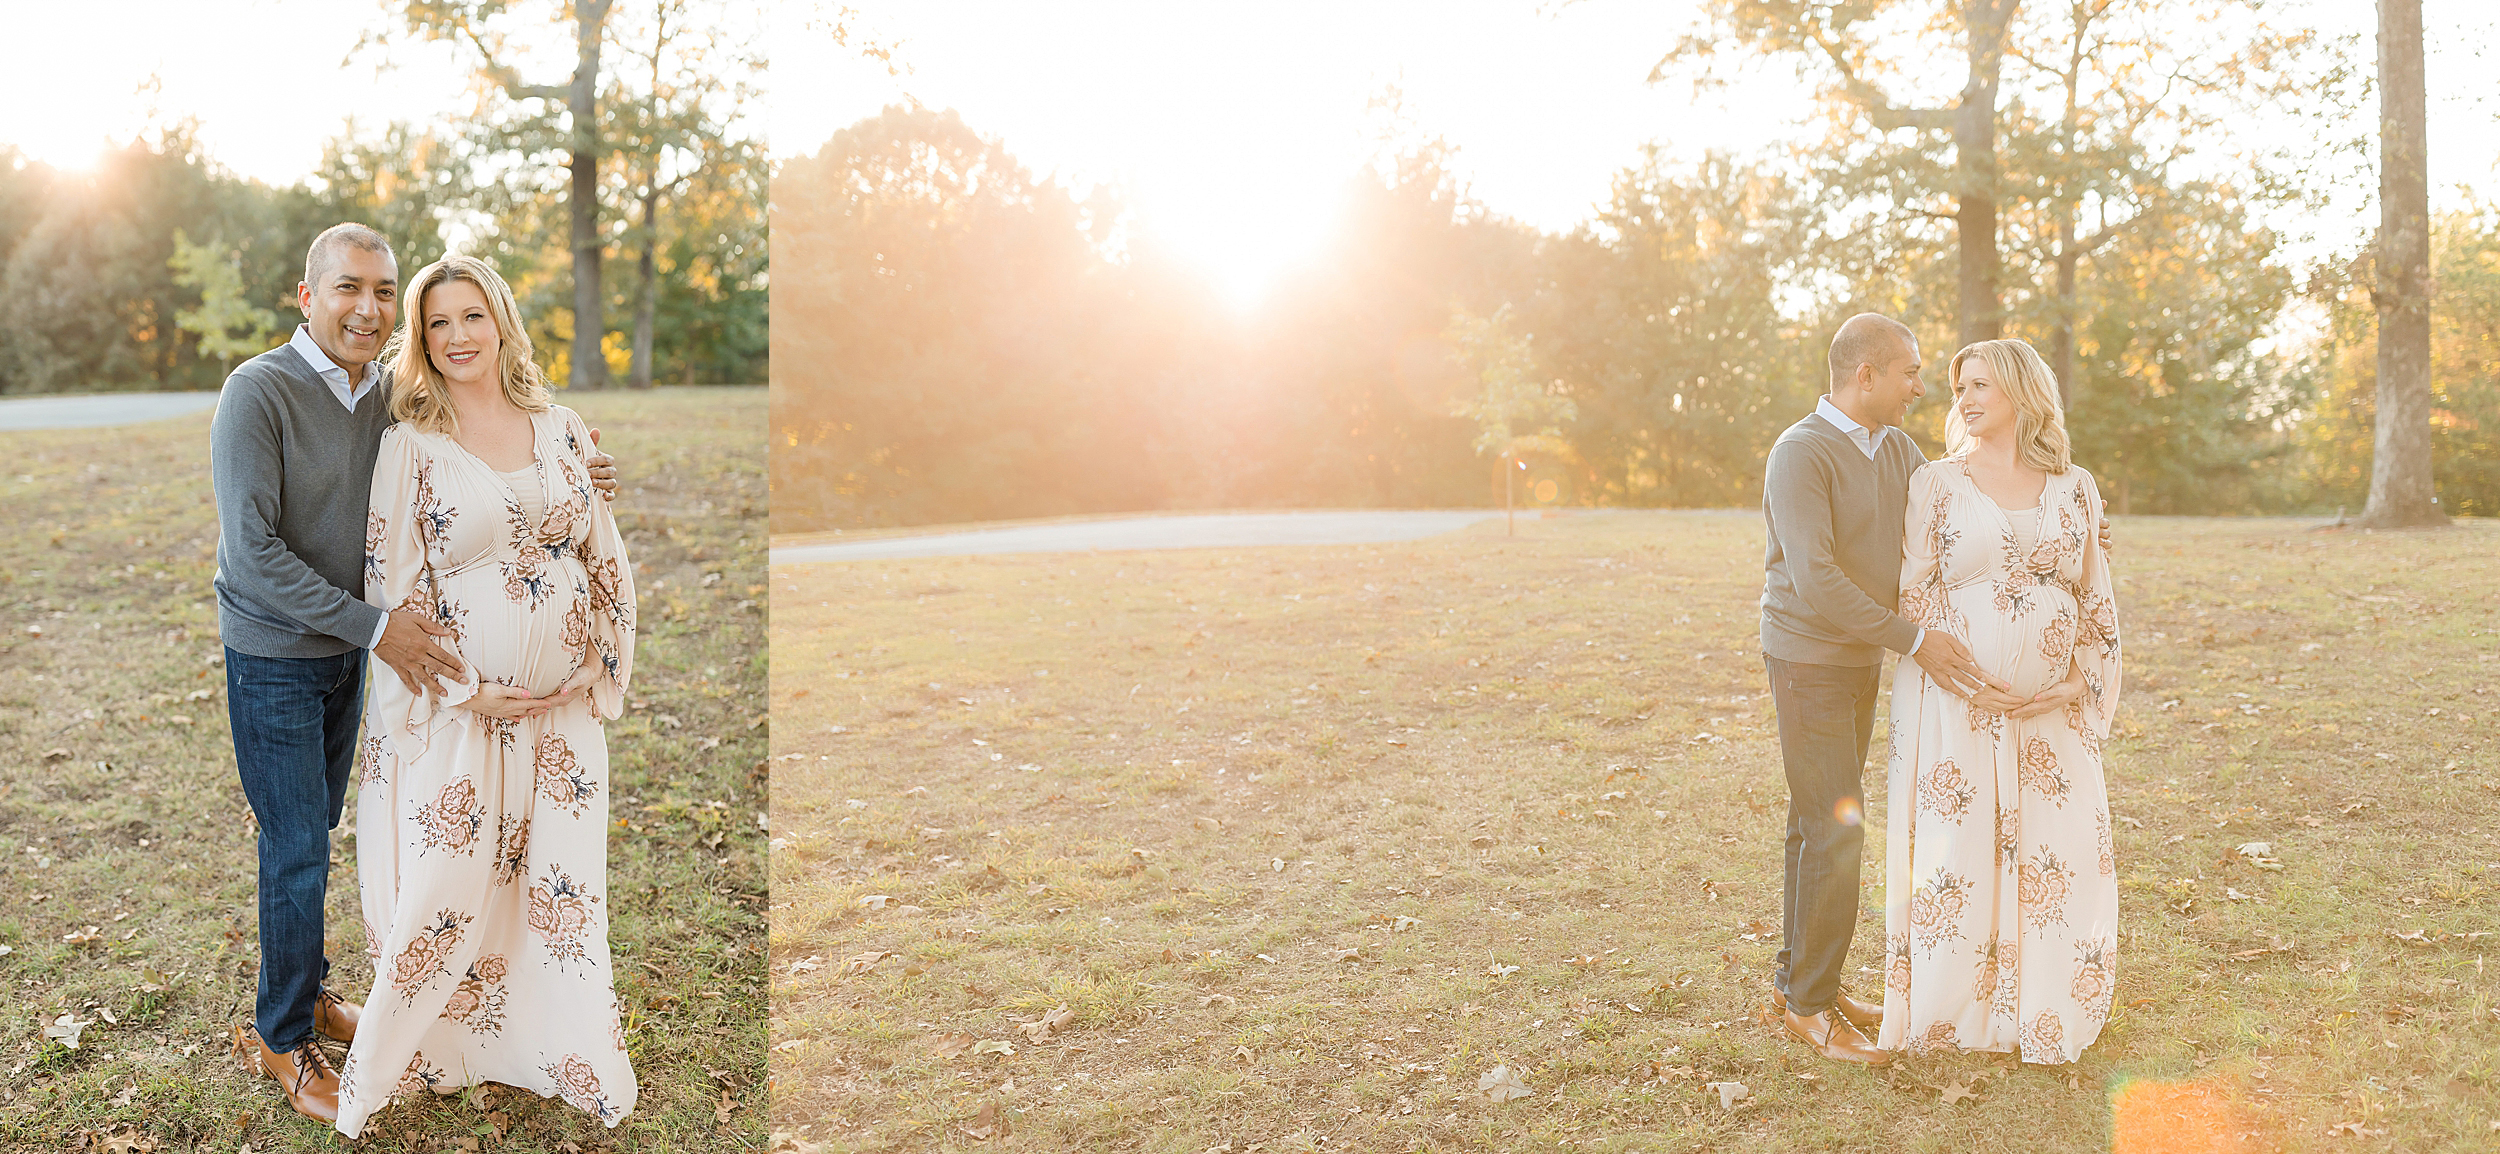 atlanta-midtown-brookhaven-decatur-lily-sophia-photography-photographer-portraits-grant-park-sunset-maternity-expecting-baby-girl-family-toddler-boy-big-brother_0090.jpg